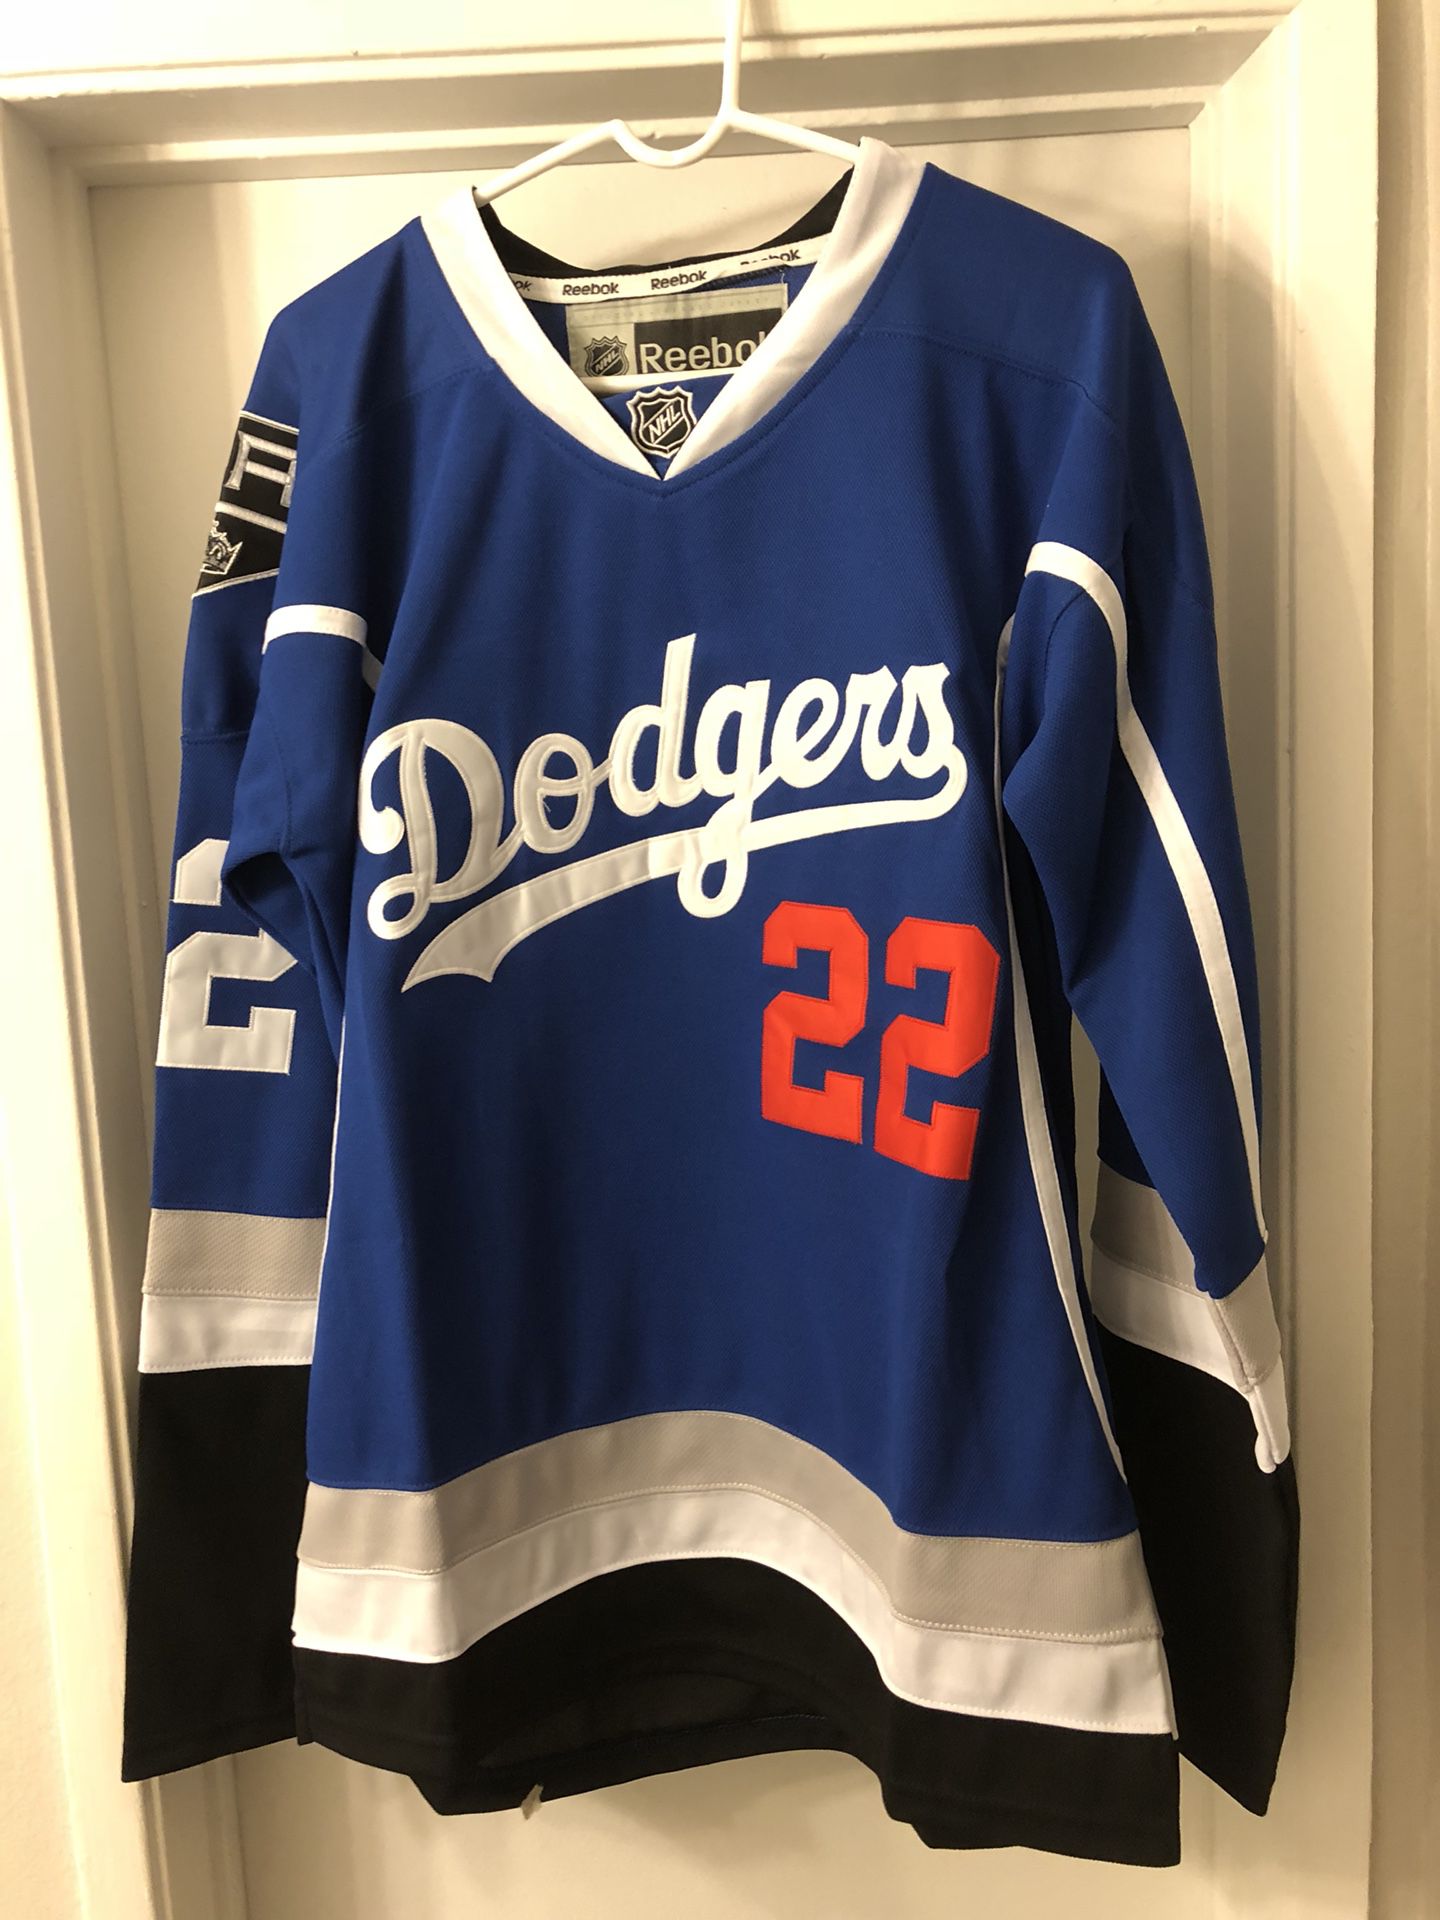 Dodgers Blue Heaven: Bid on Some of Those Great Dodgers' Hockey Jersey's  Now!